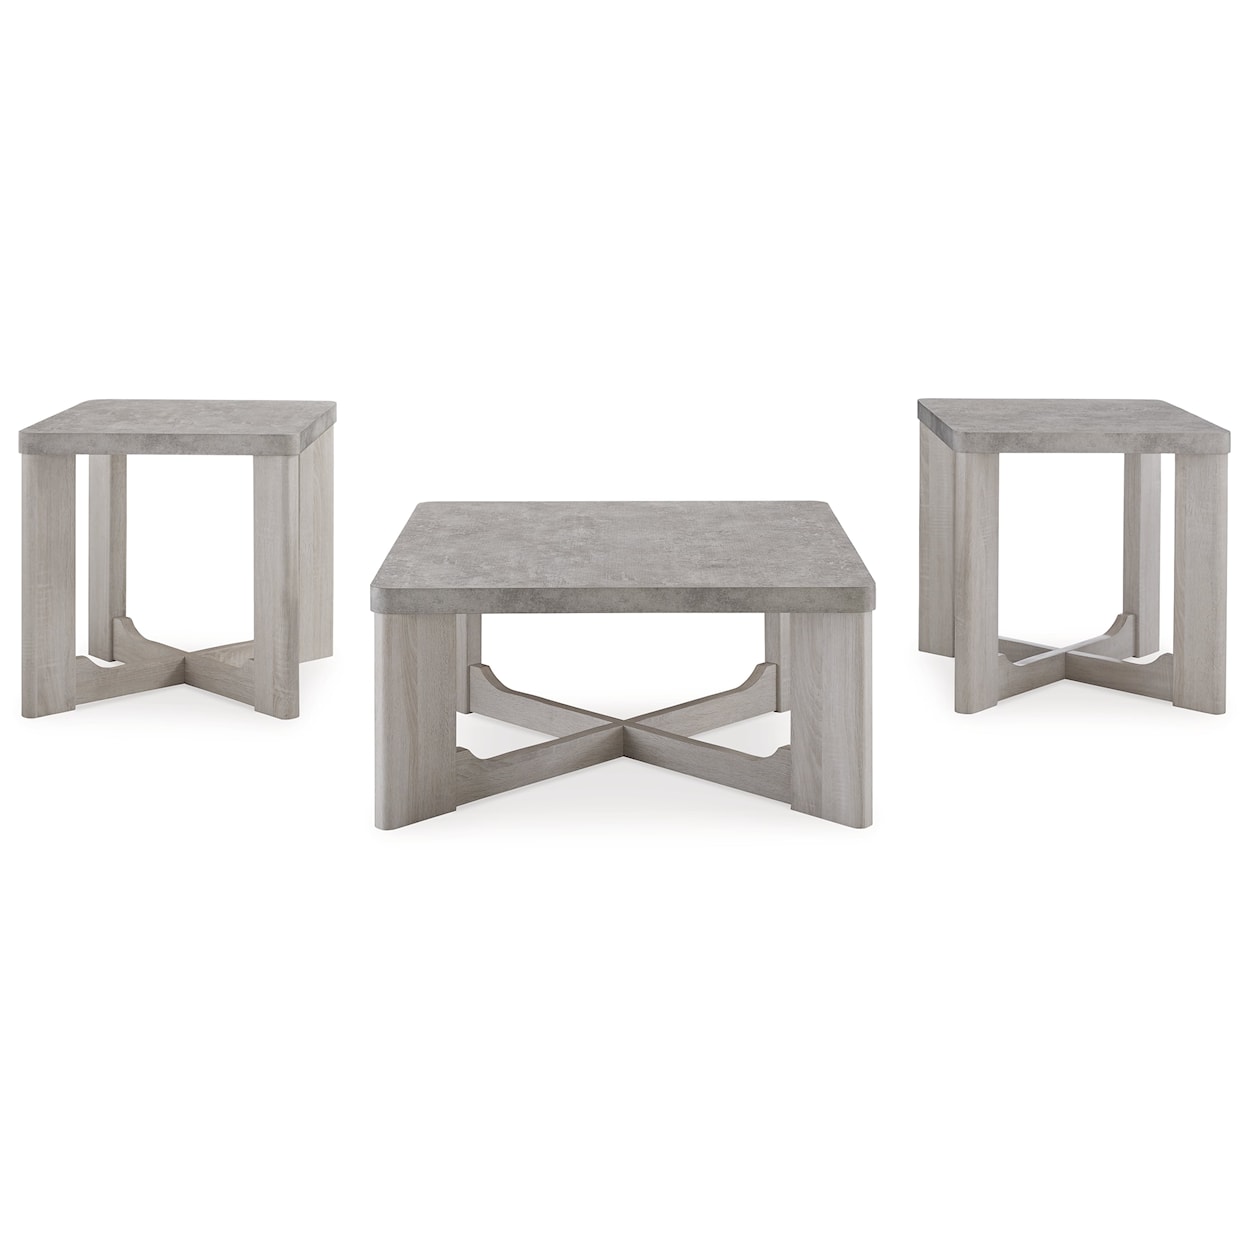 Benchcraft Garnilly Occasional Table Set